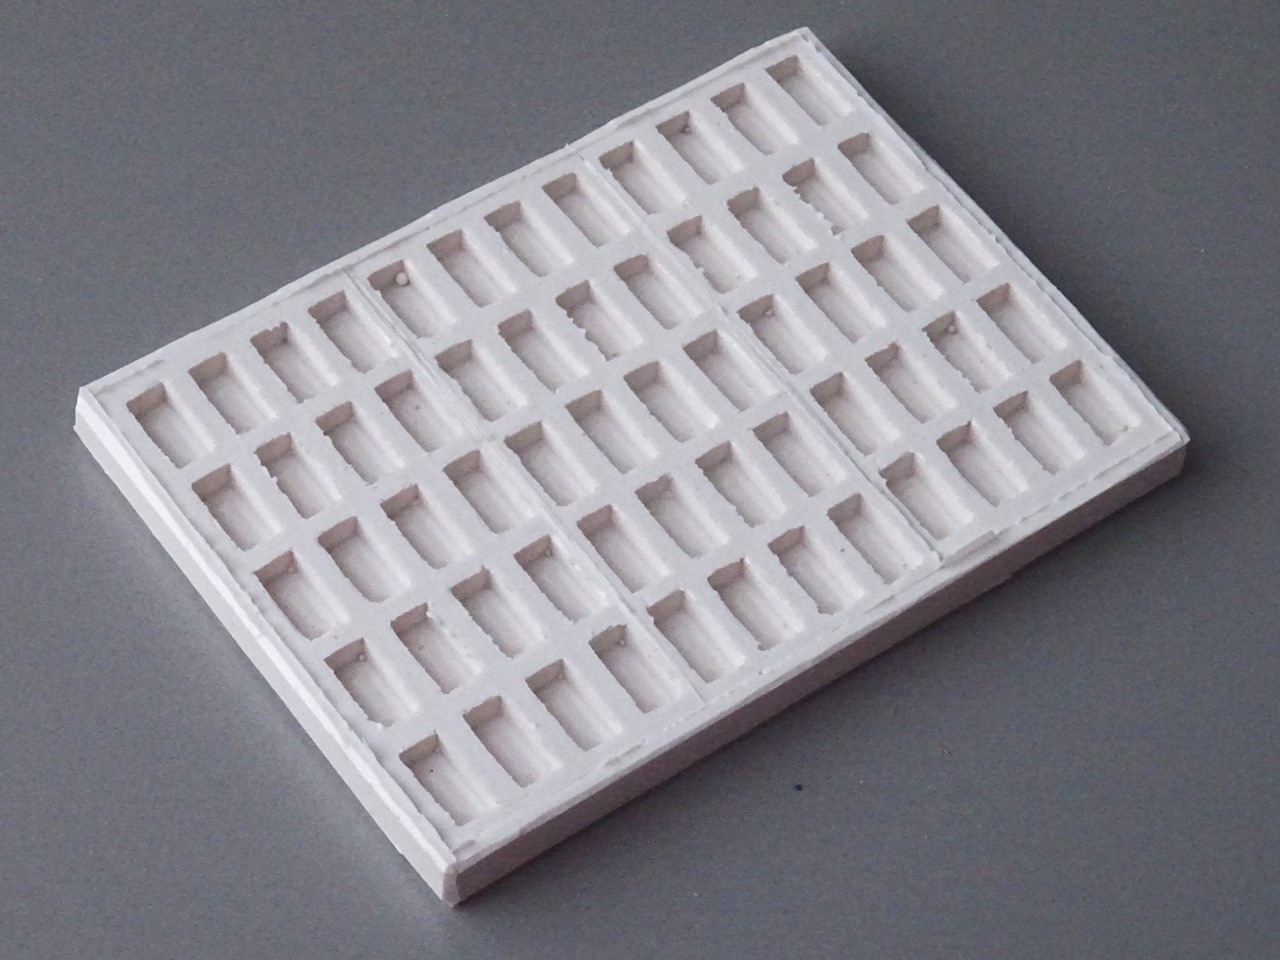 Picture of Individual 1:19 scale bricks